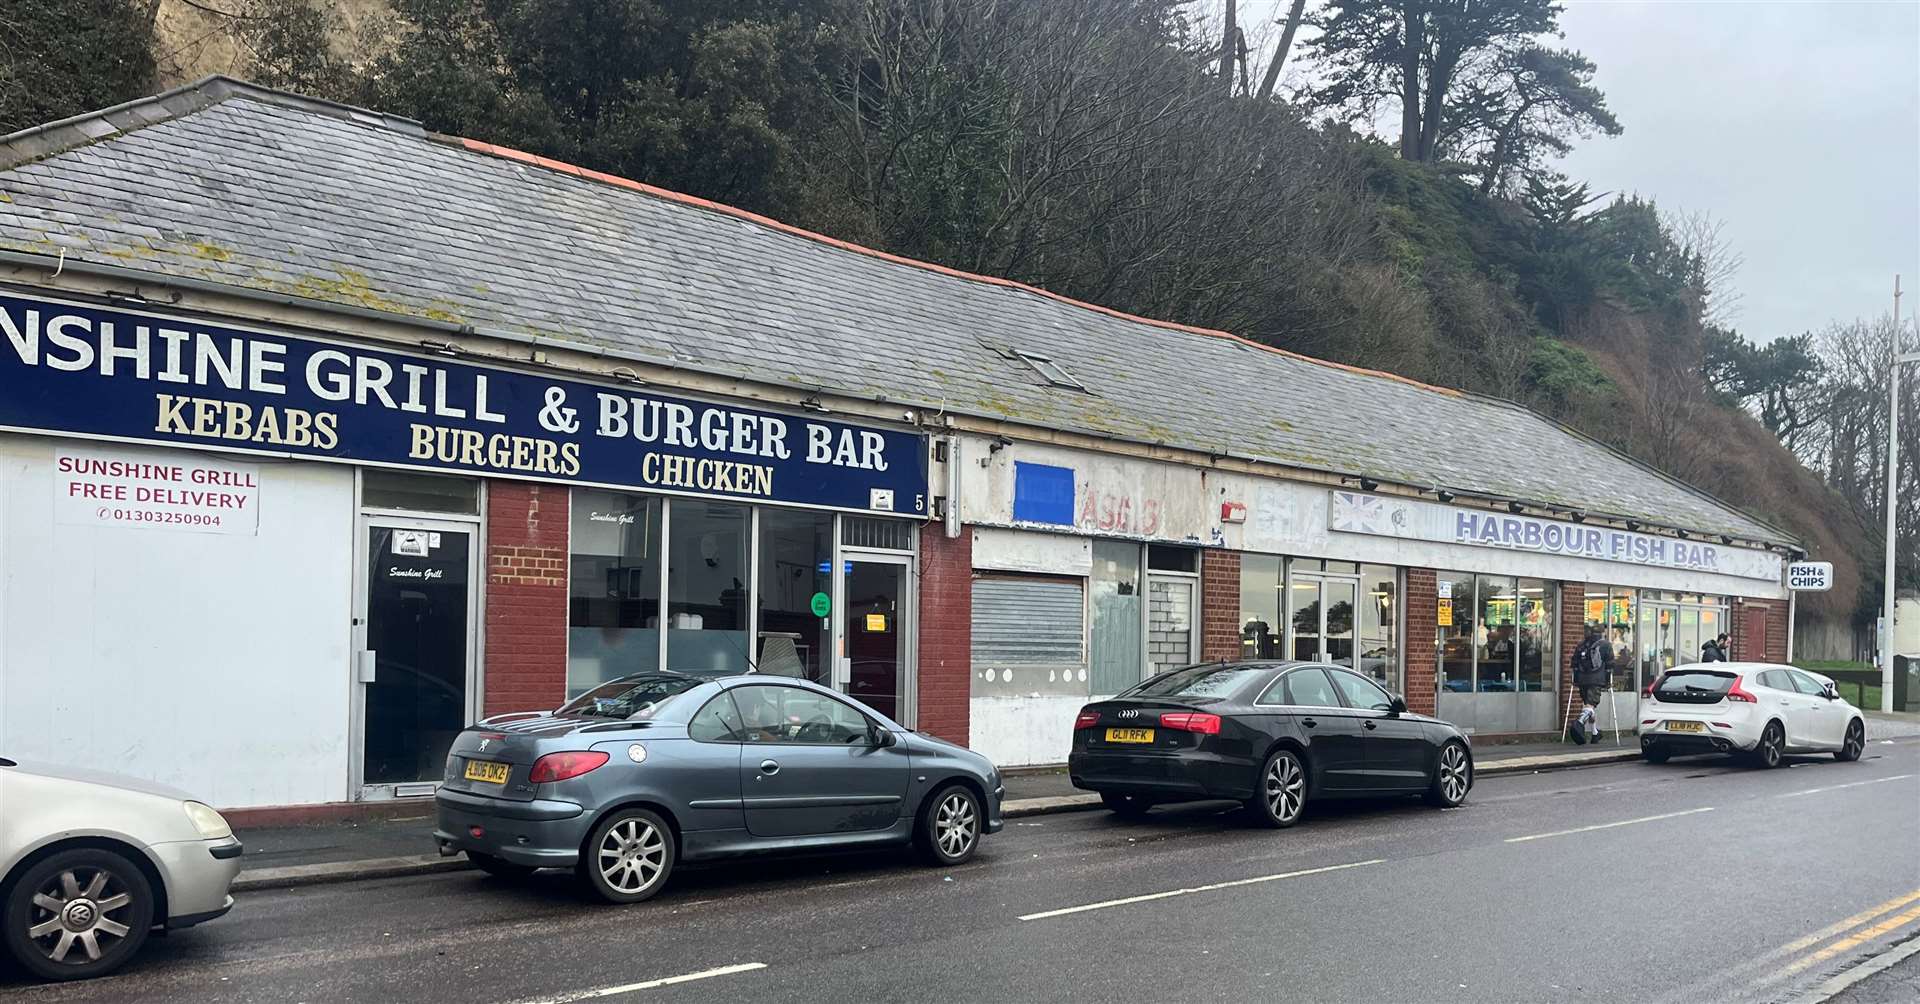 A parade of shops on Lower Sandgate Road where the Harbour Fish Bar remains open after only experiencing minimal damage in the recent landslides